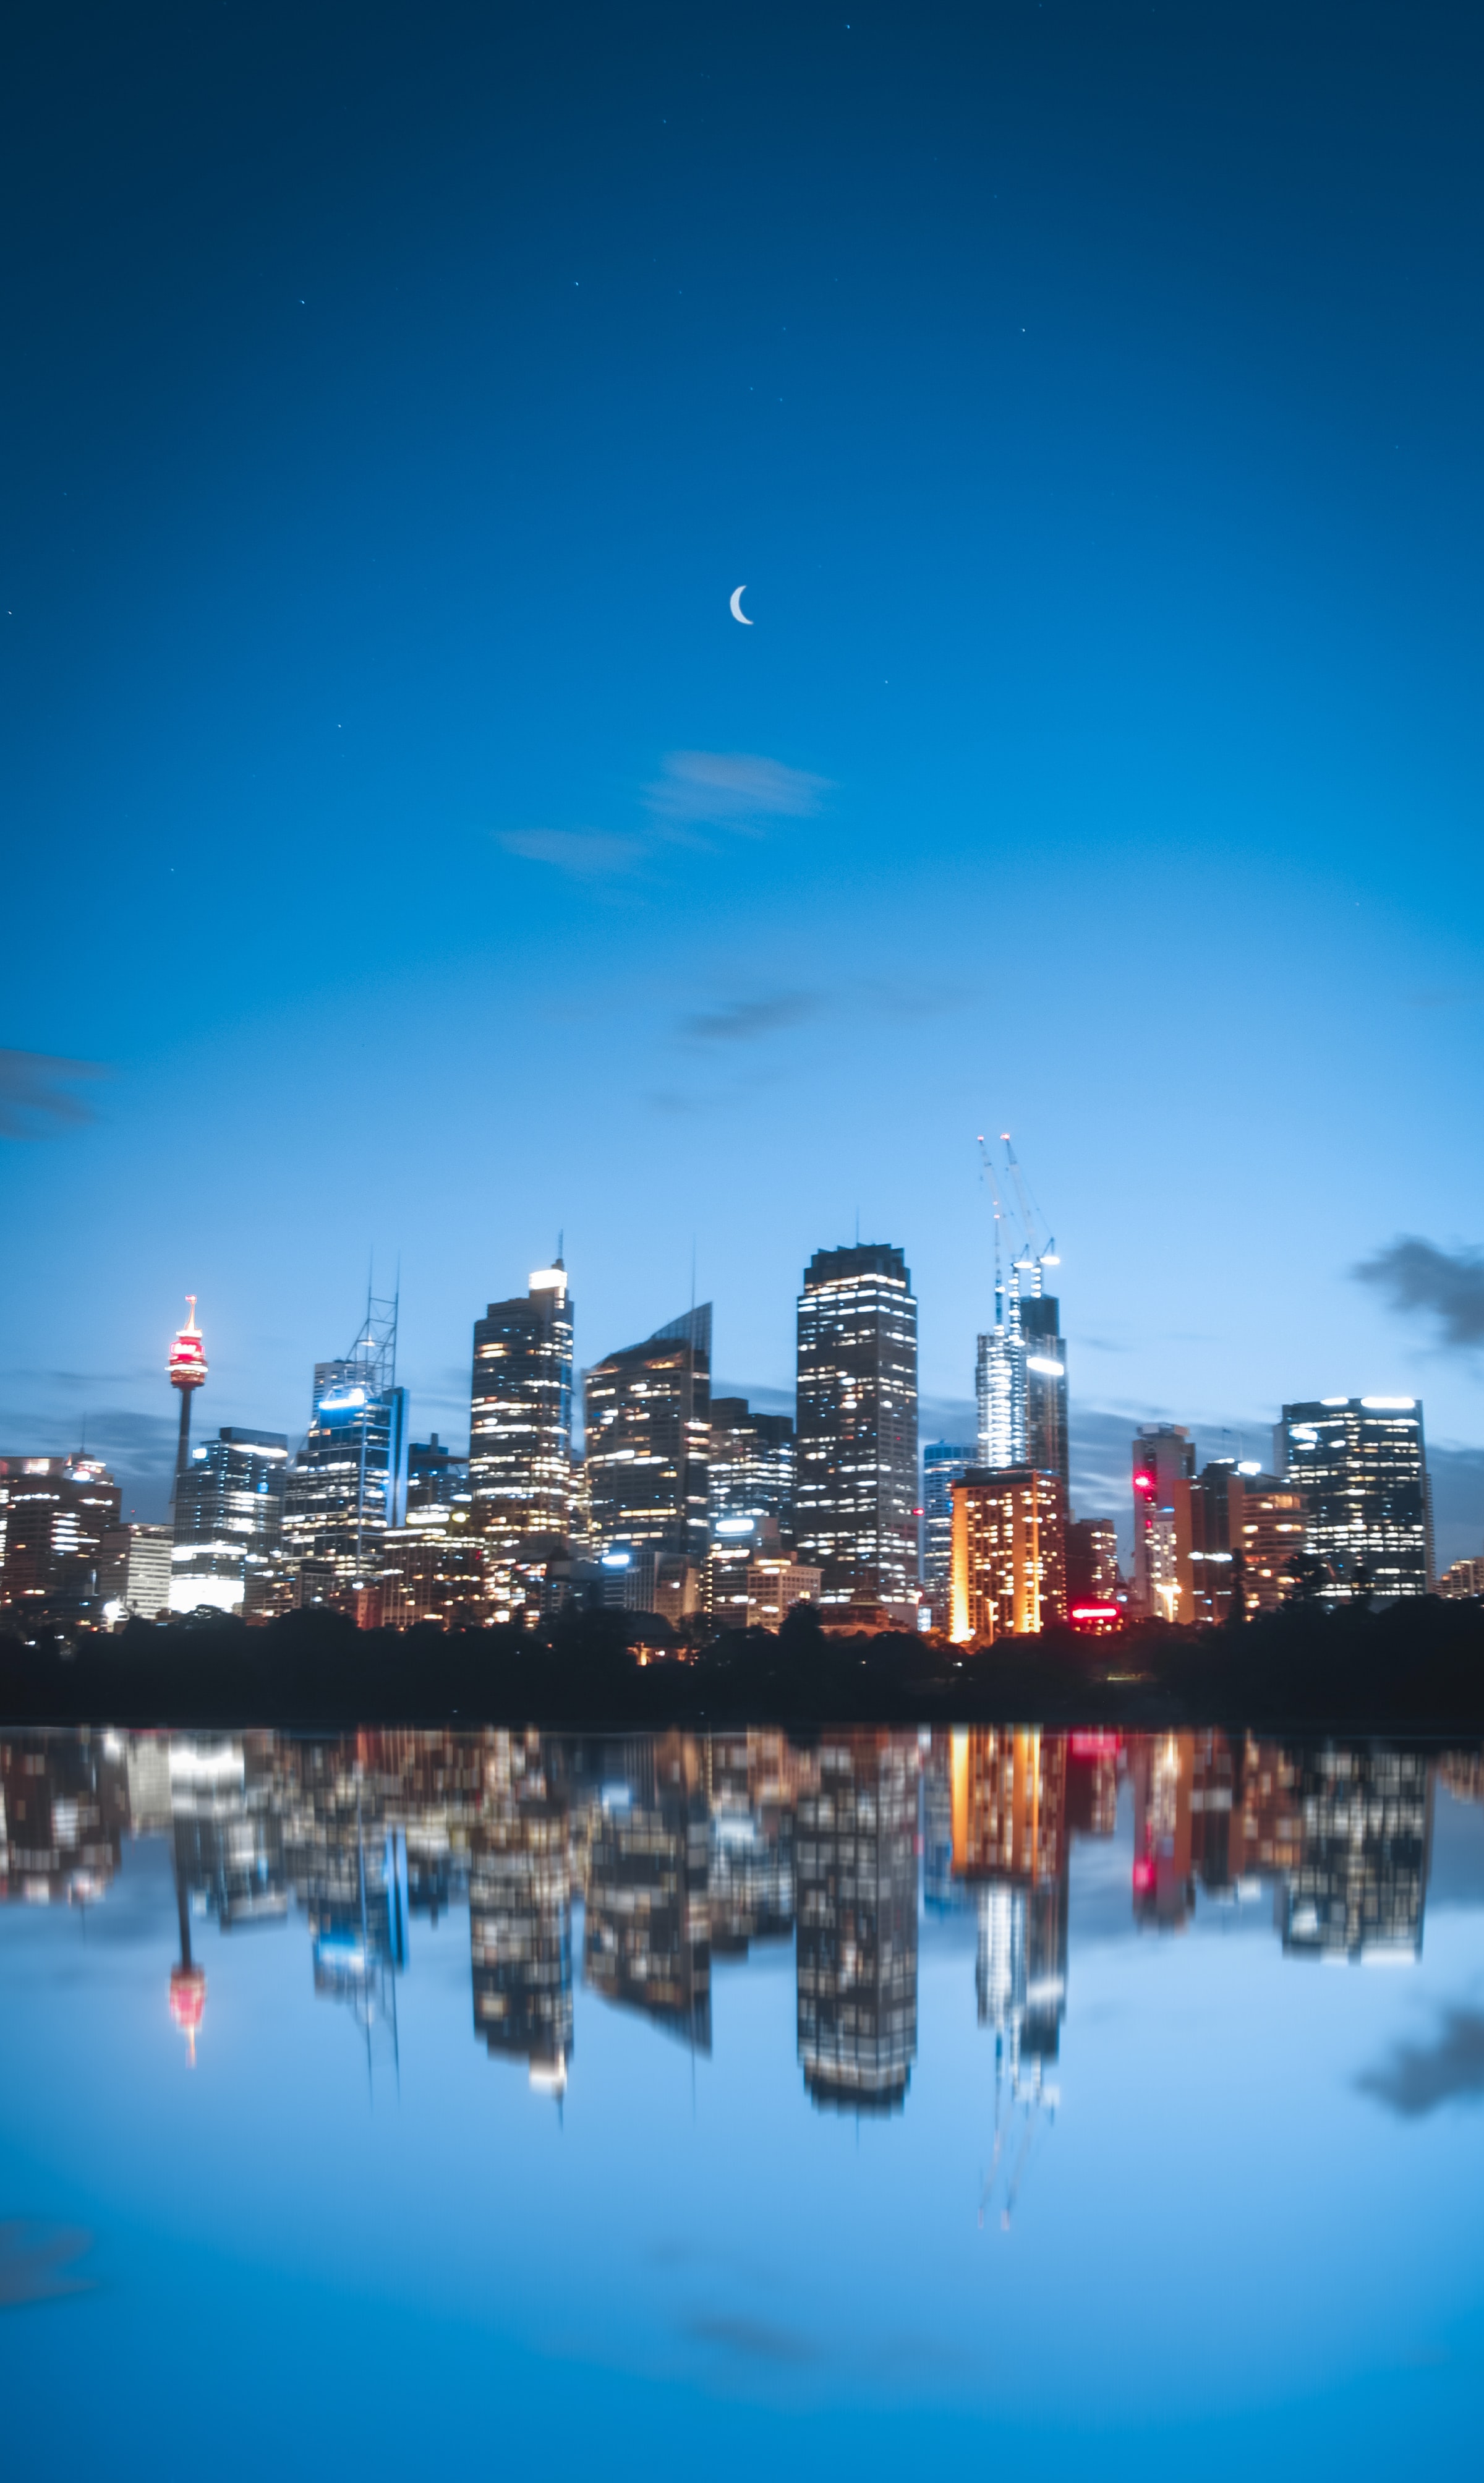 Moon building, lights, reflection, night city 1366x768 Wallpapers